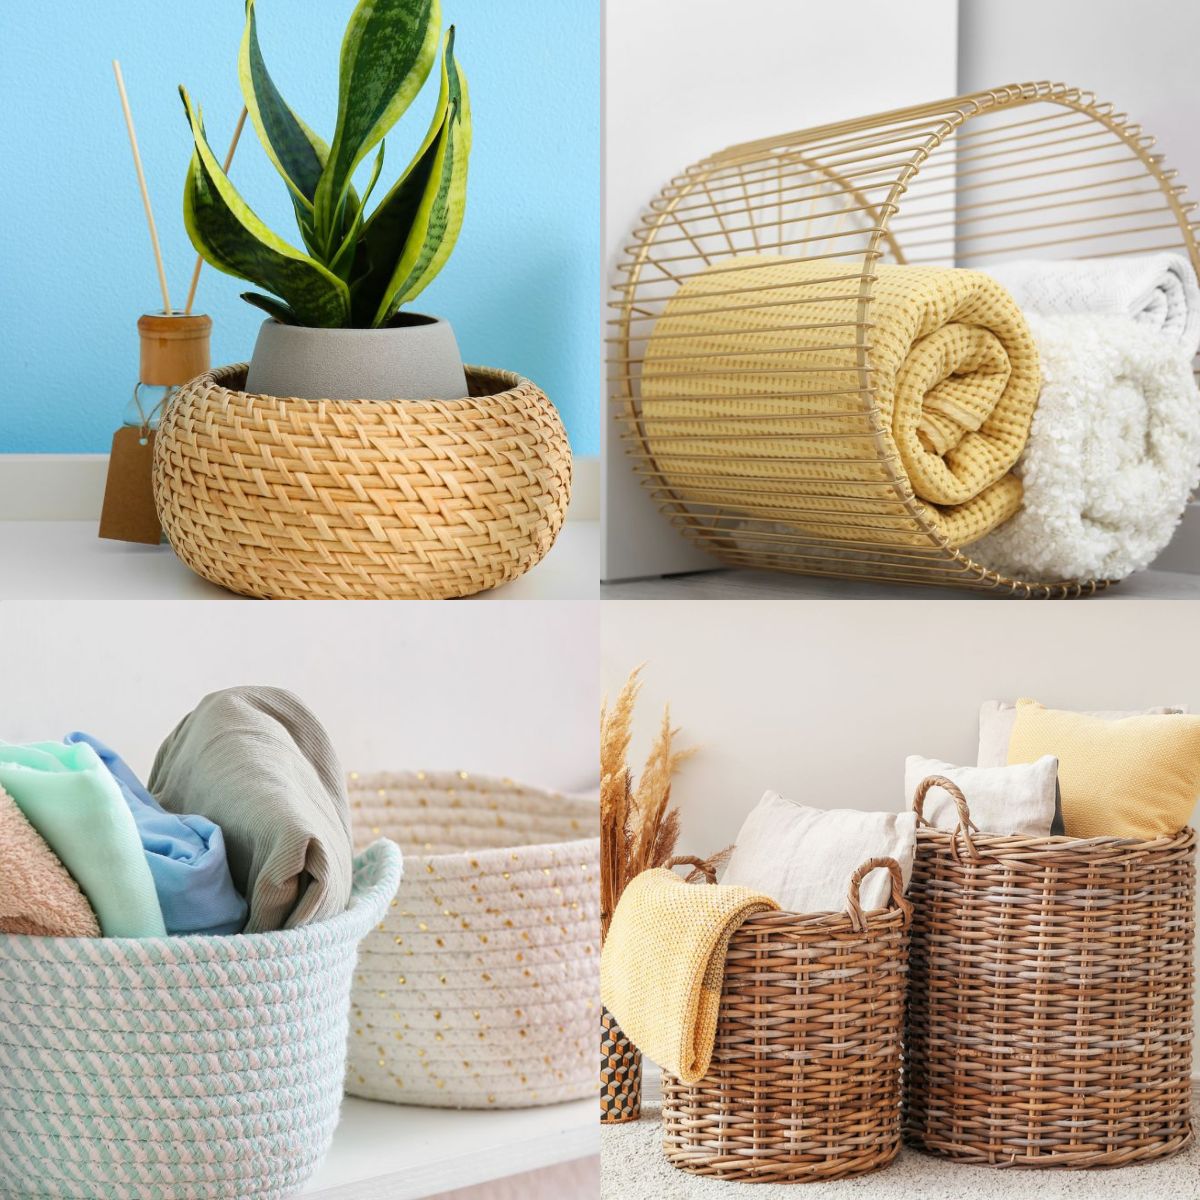 Ever think about adding cute accented home decor to your house only to see the price and completely change your mind? These ways to organize baskets on a budget will help! 😉 #Organizing #Baskets LocalInfoForYou.com/350146/ways-to…